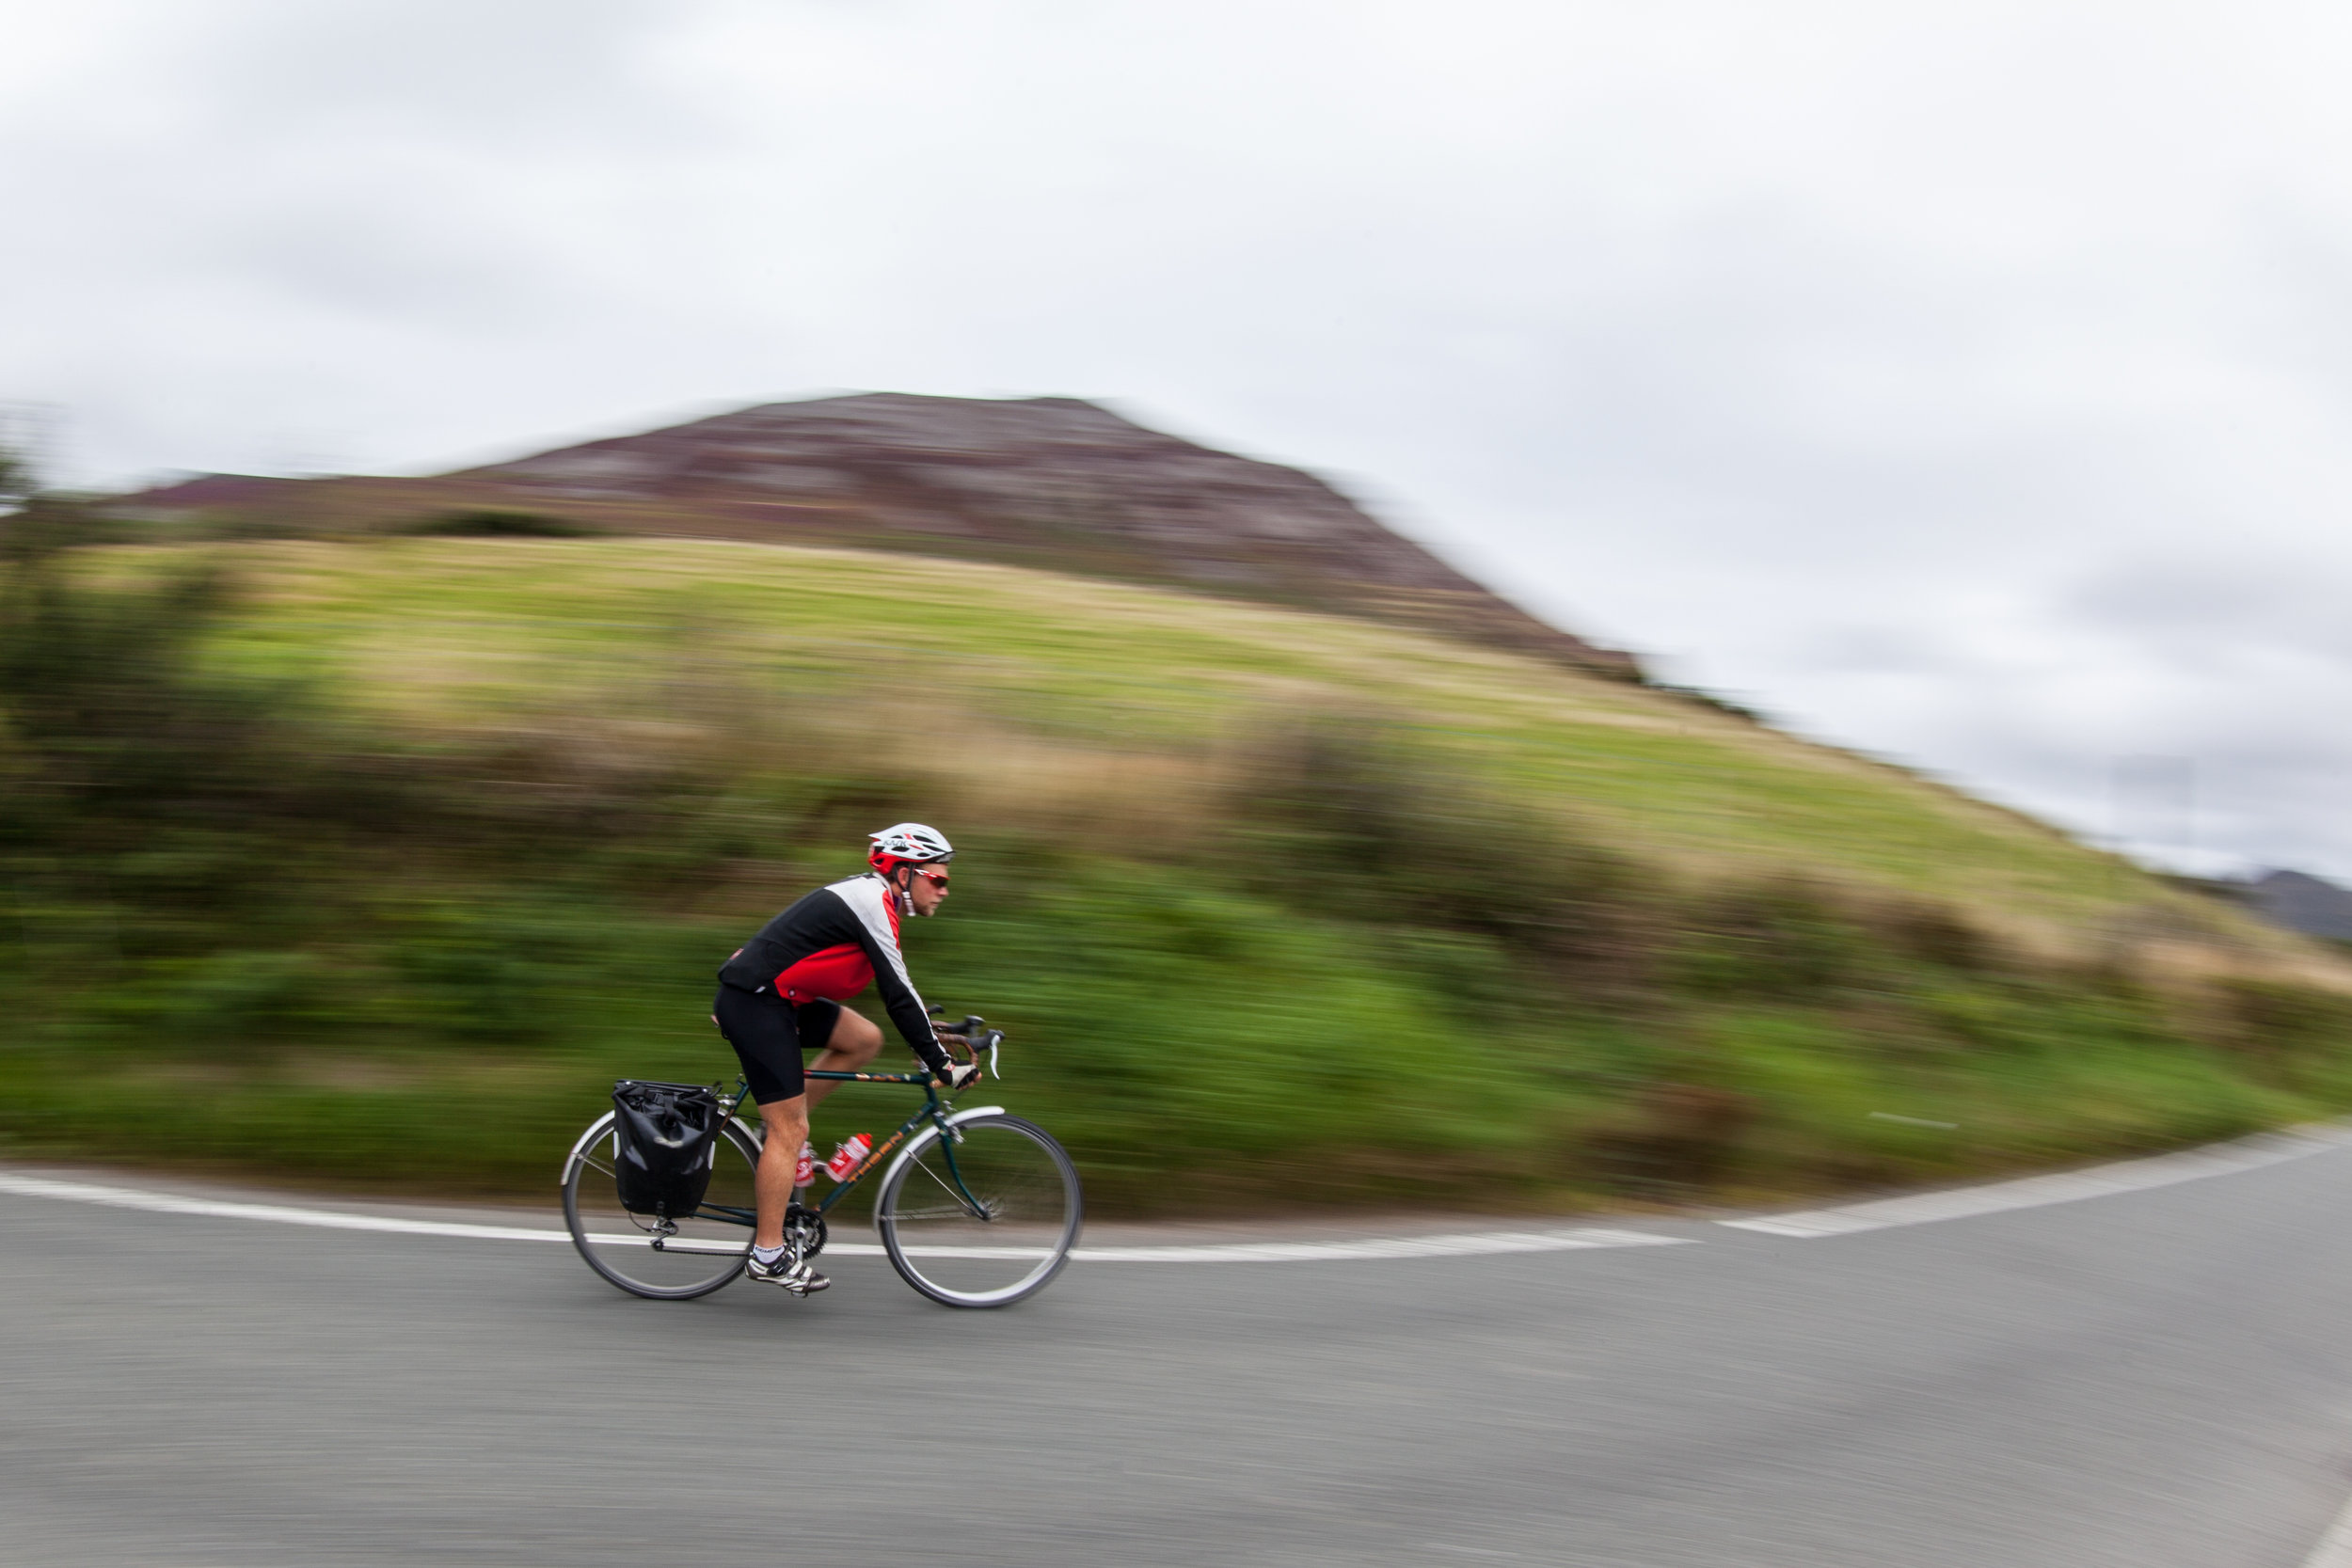 james Cope cycling through Wales on the Countrywide Great Tour.